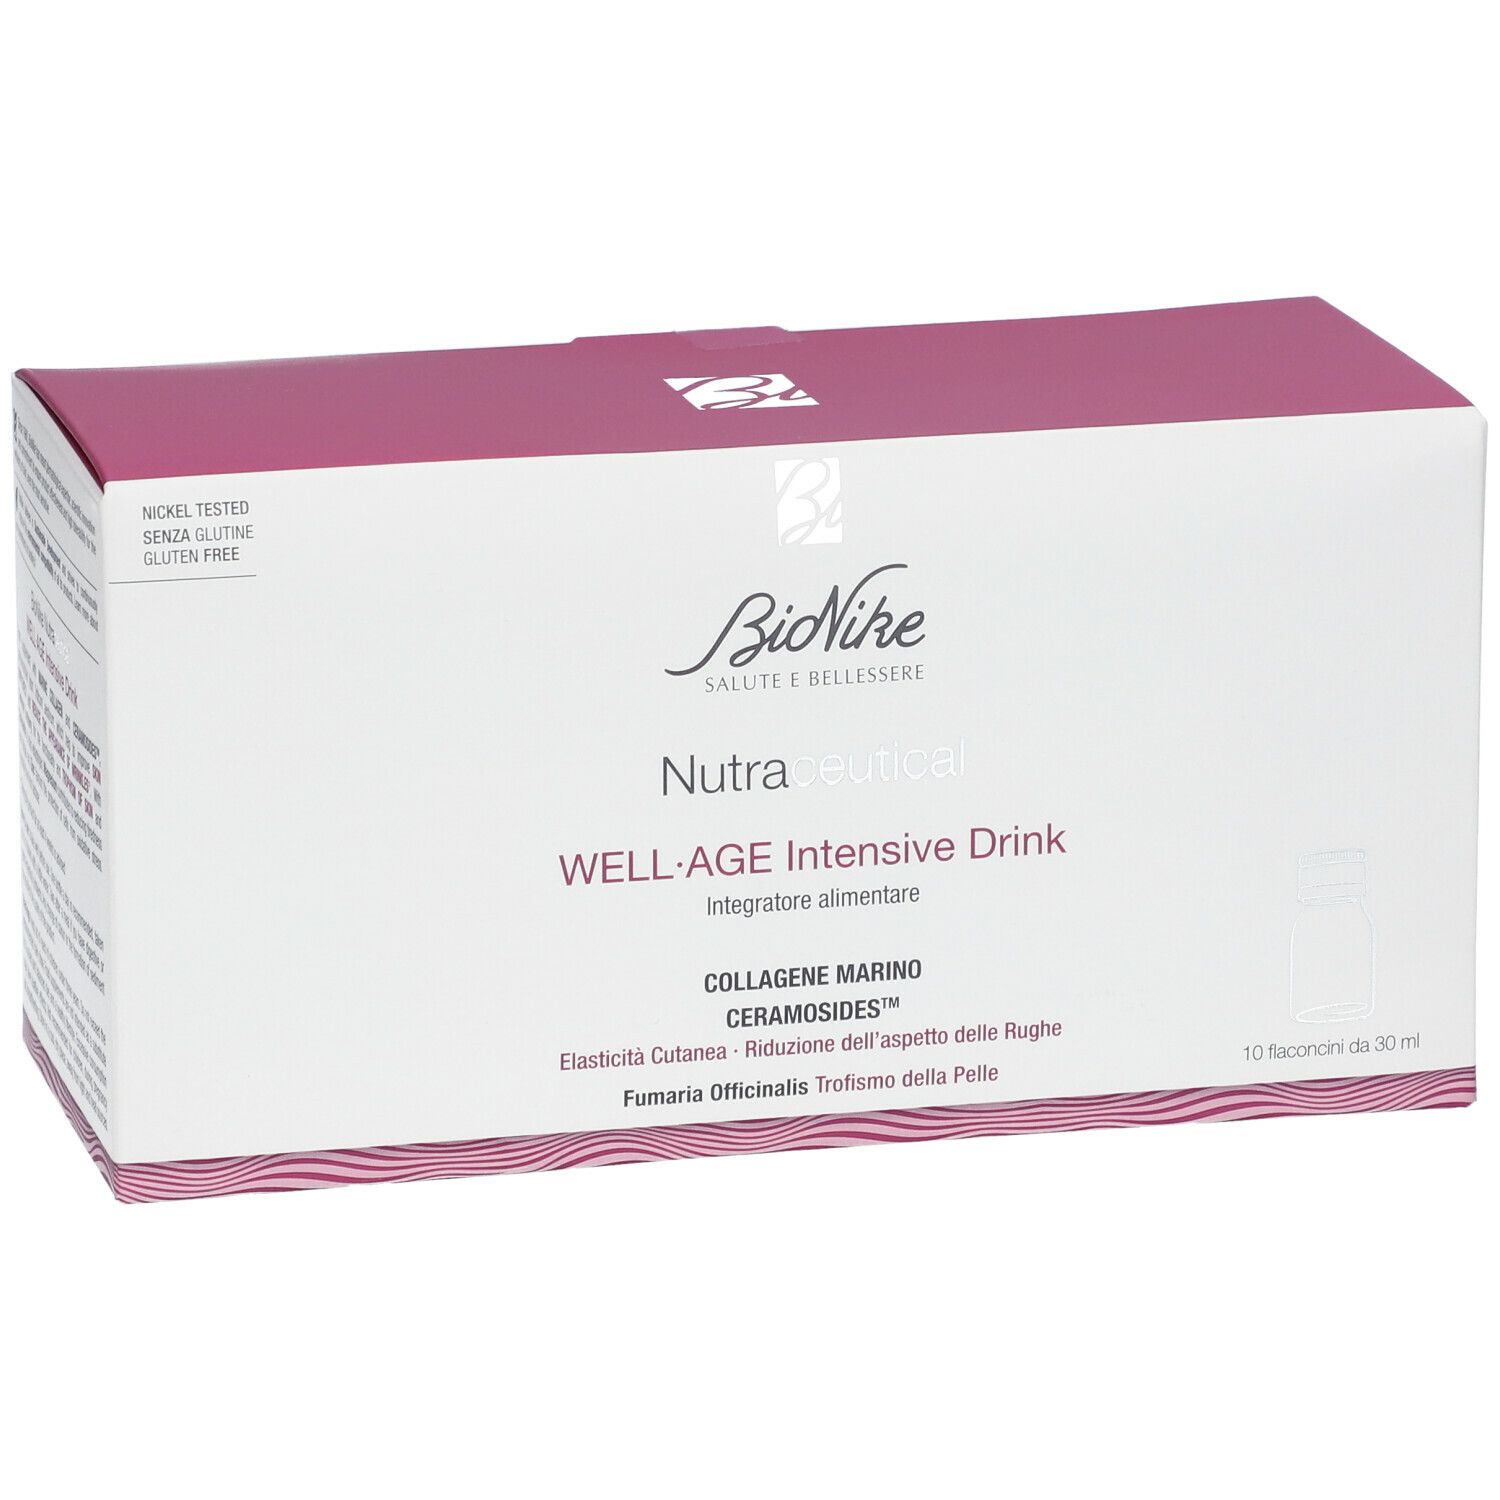 BioNike Nutraceutical Well Age Intensive Drink